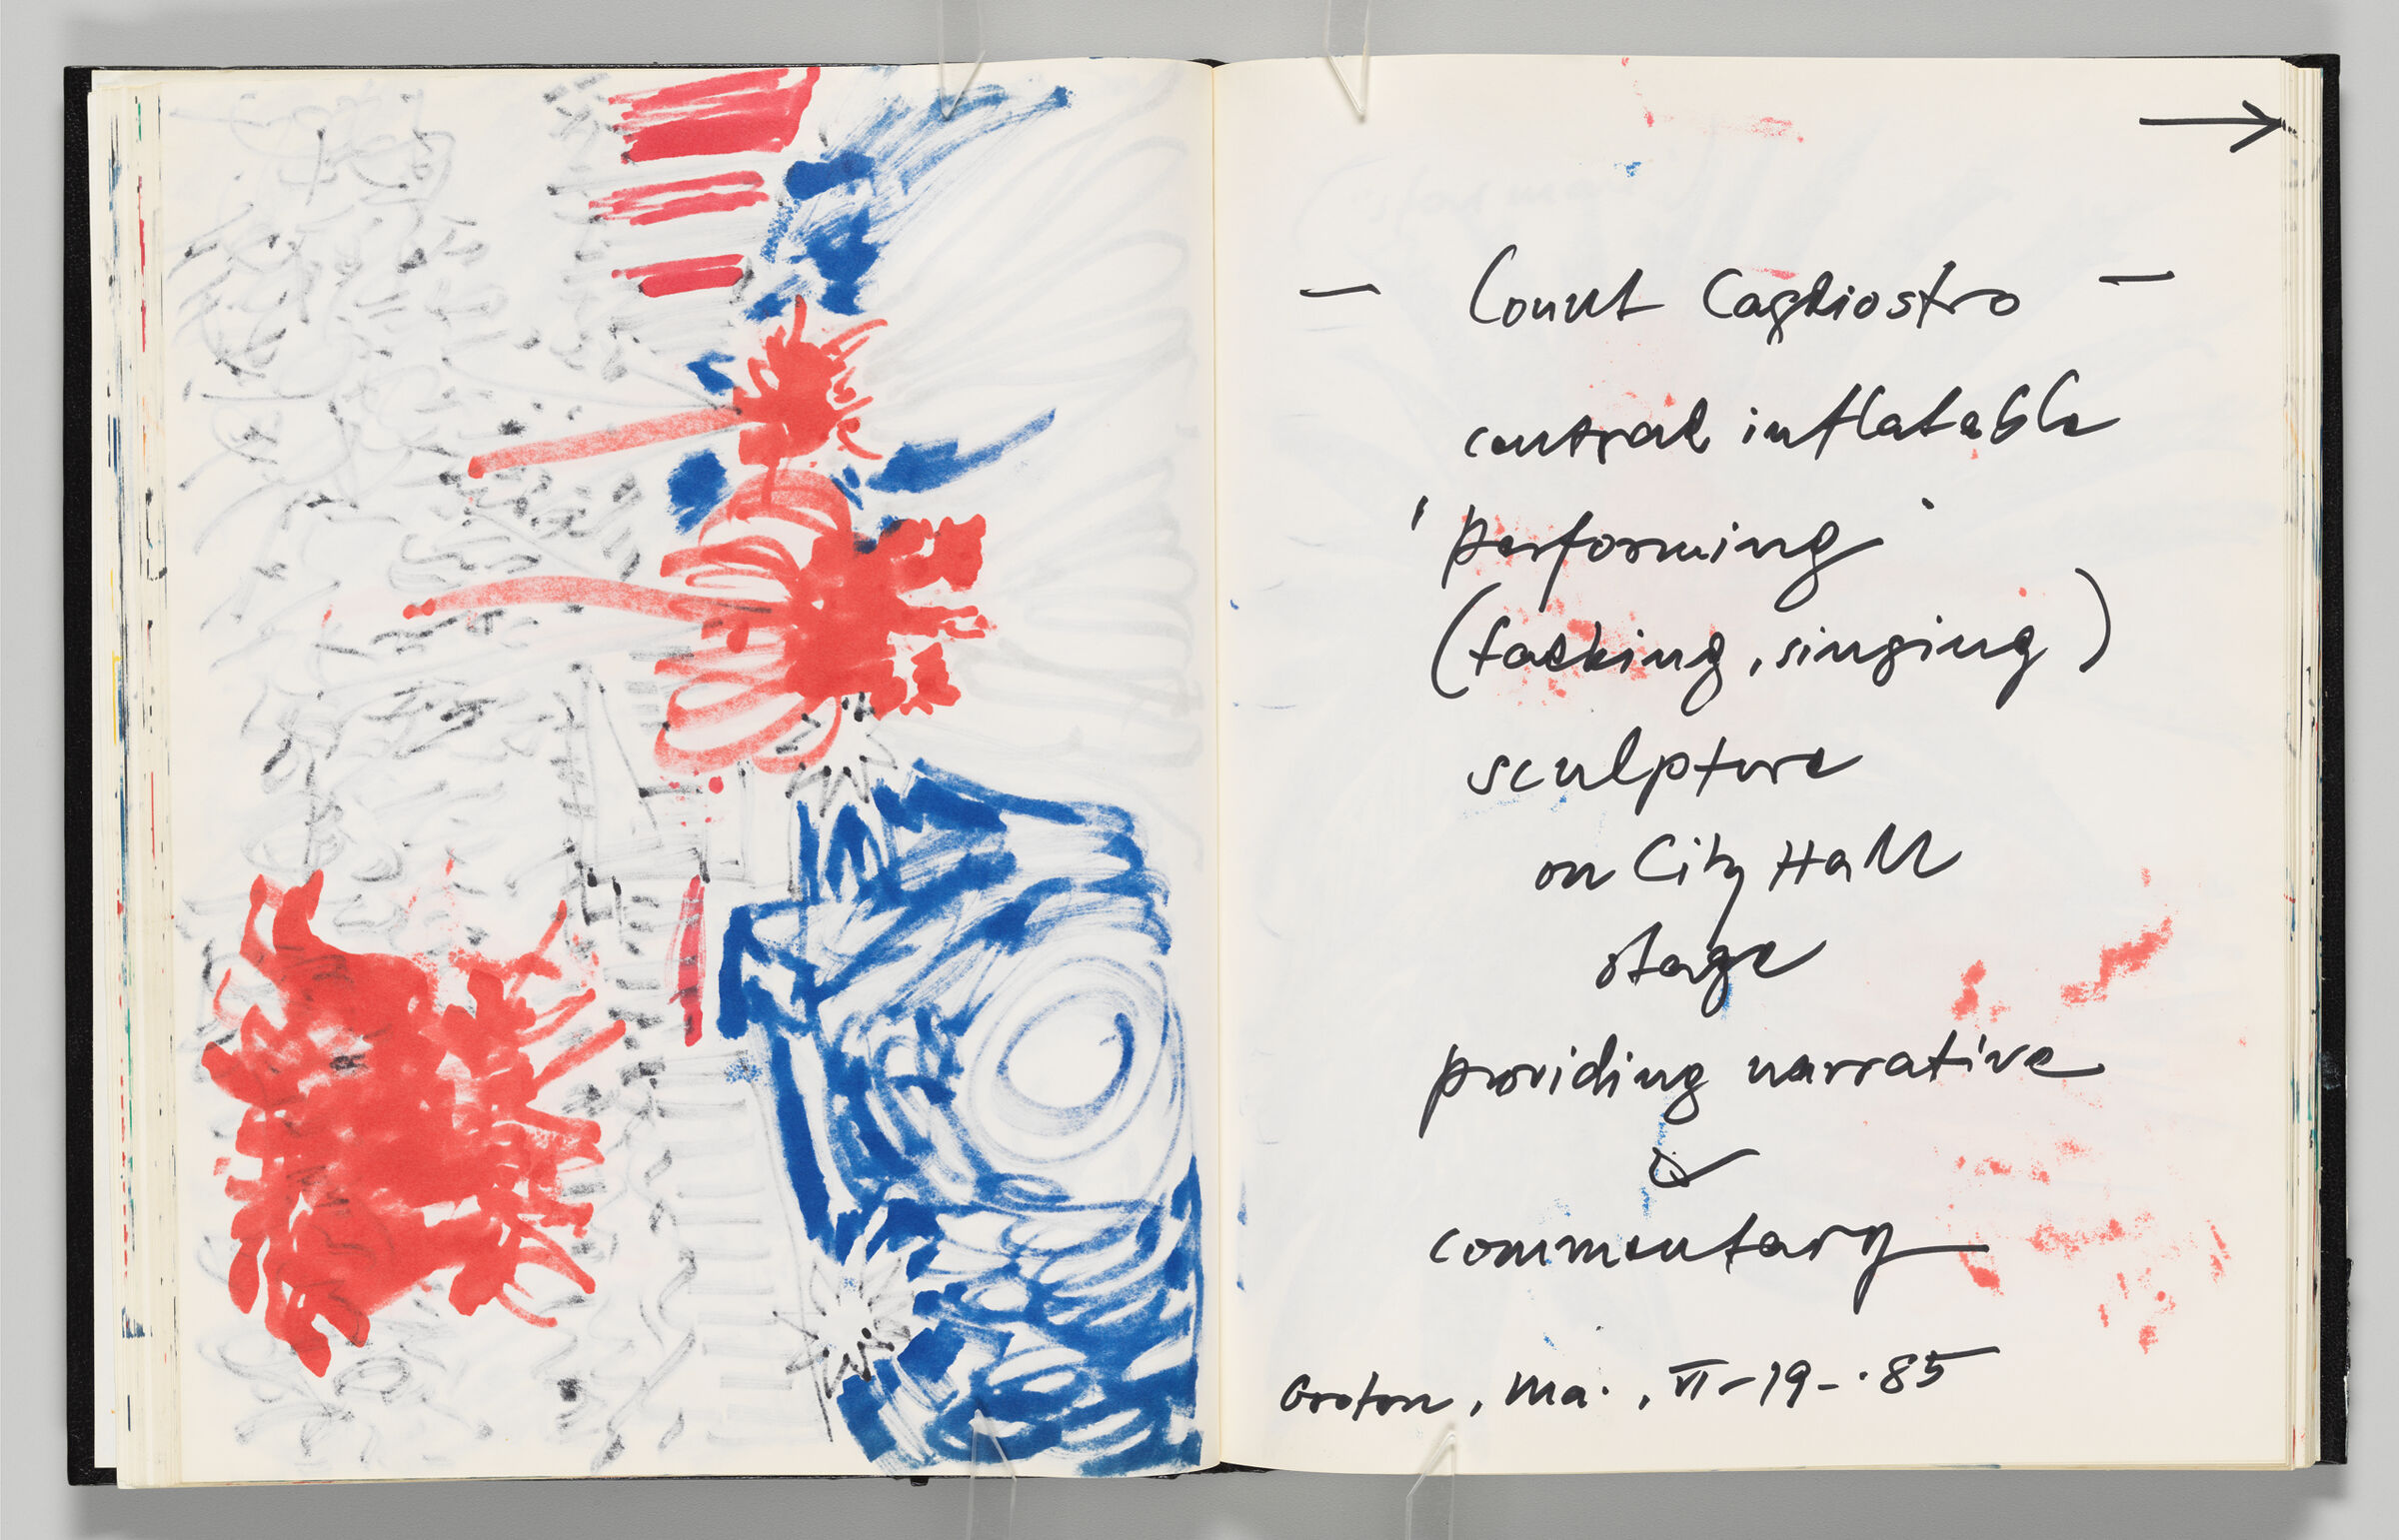 Untitled (Bleed-Through Of Previous Page, Left Page); Untitled (Notes, With Color Transfer Marks Right Page)